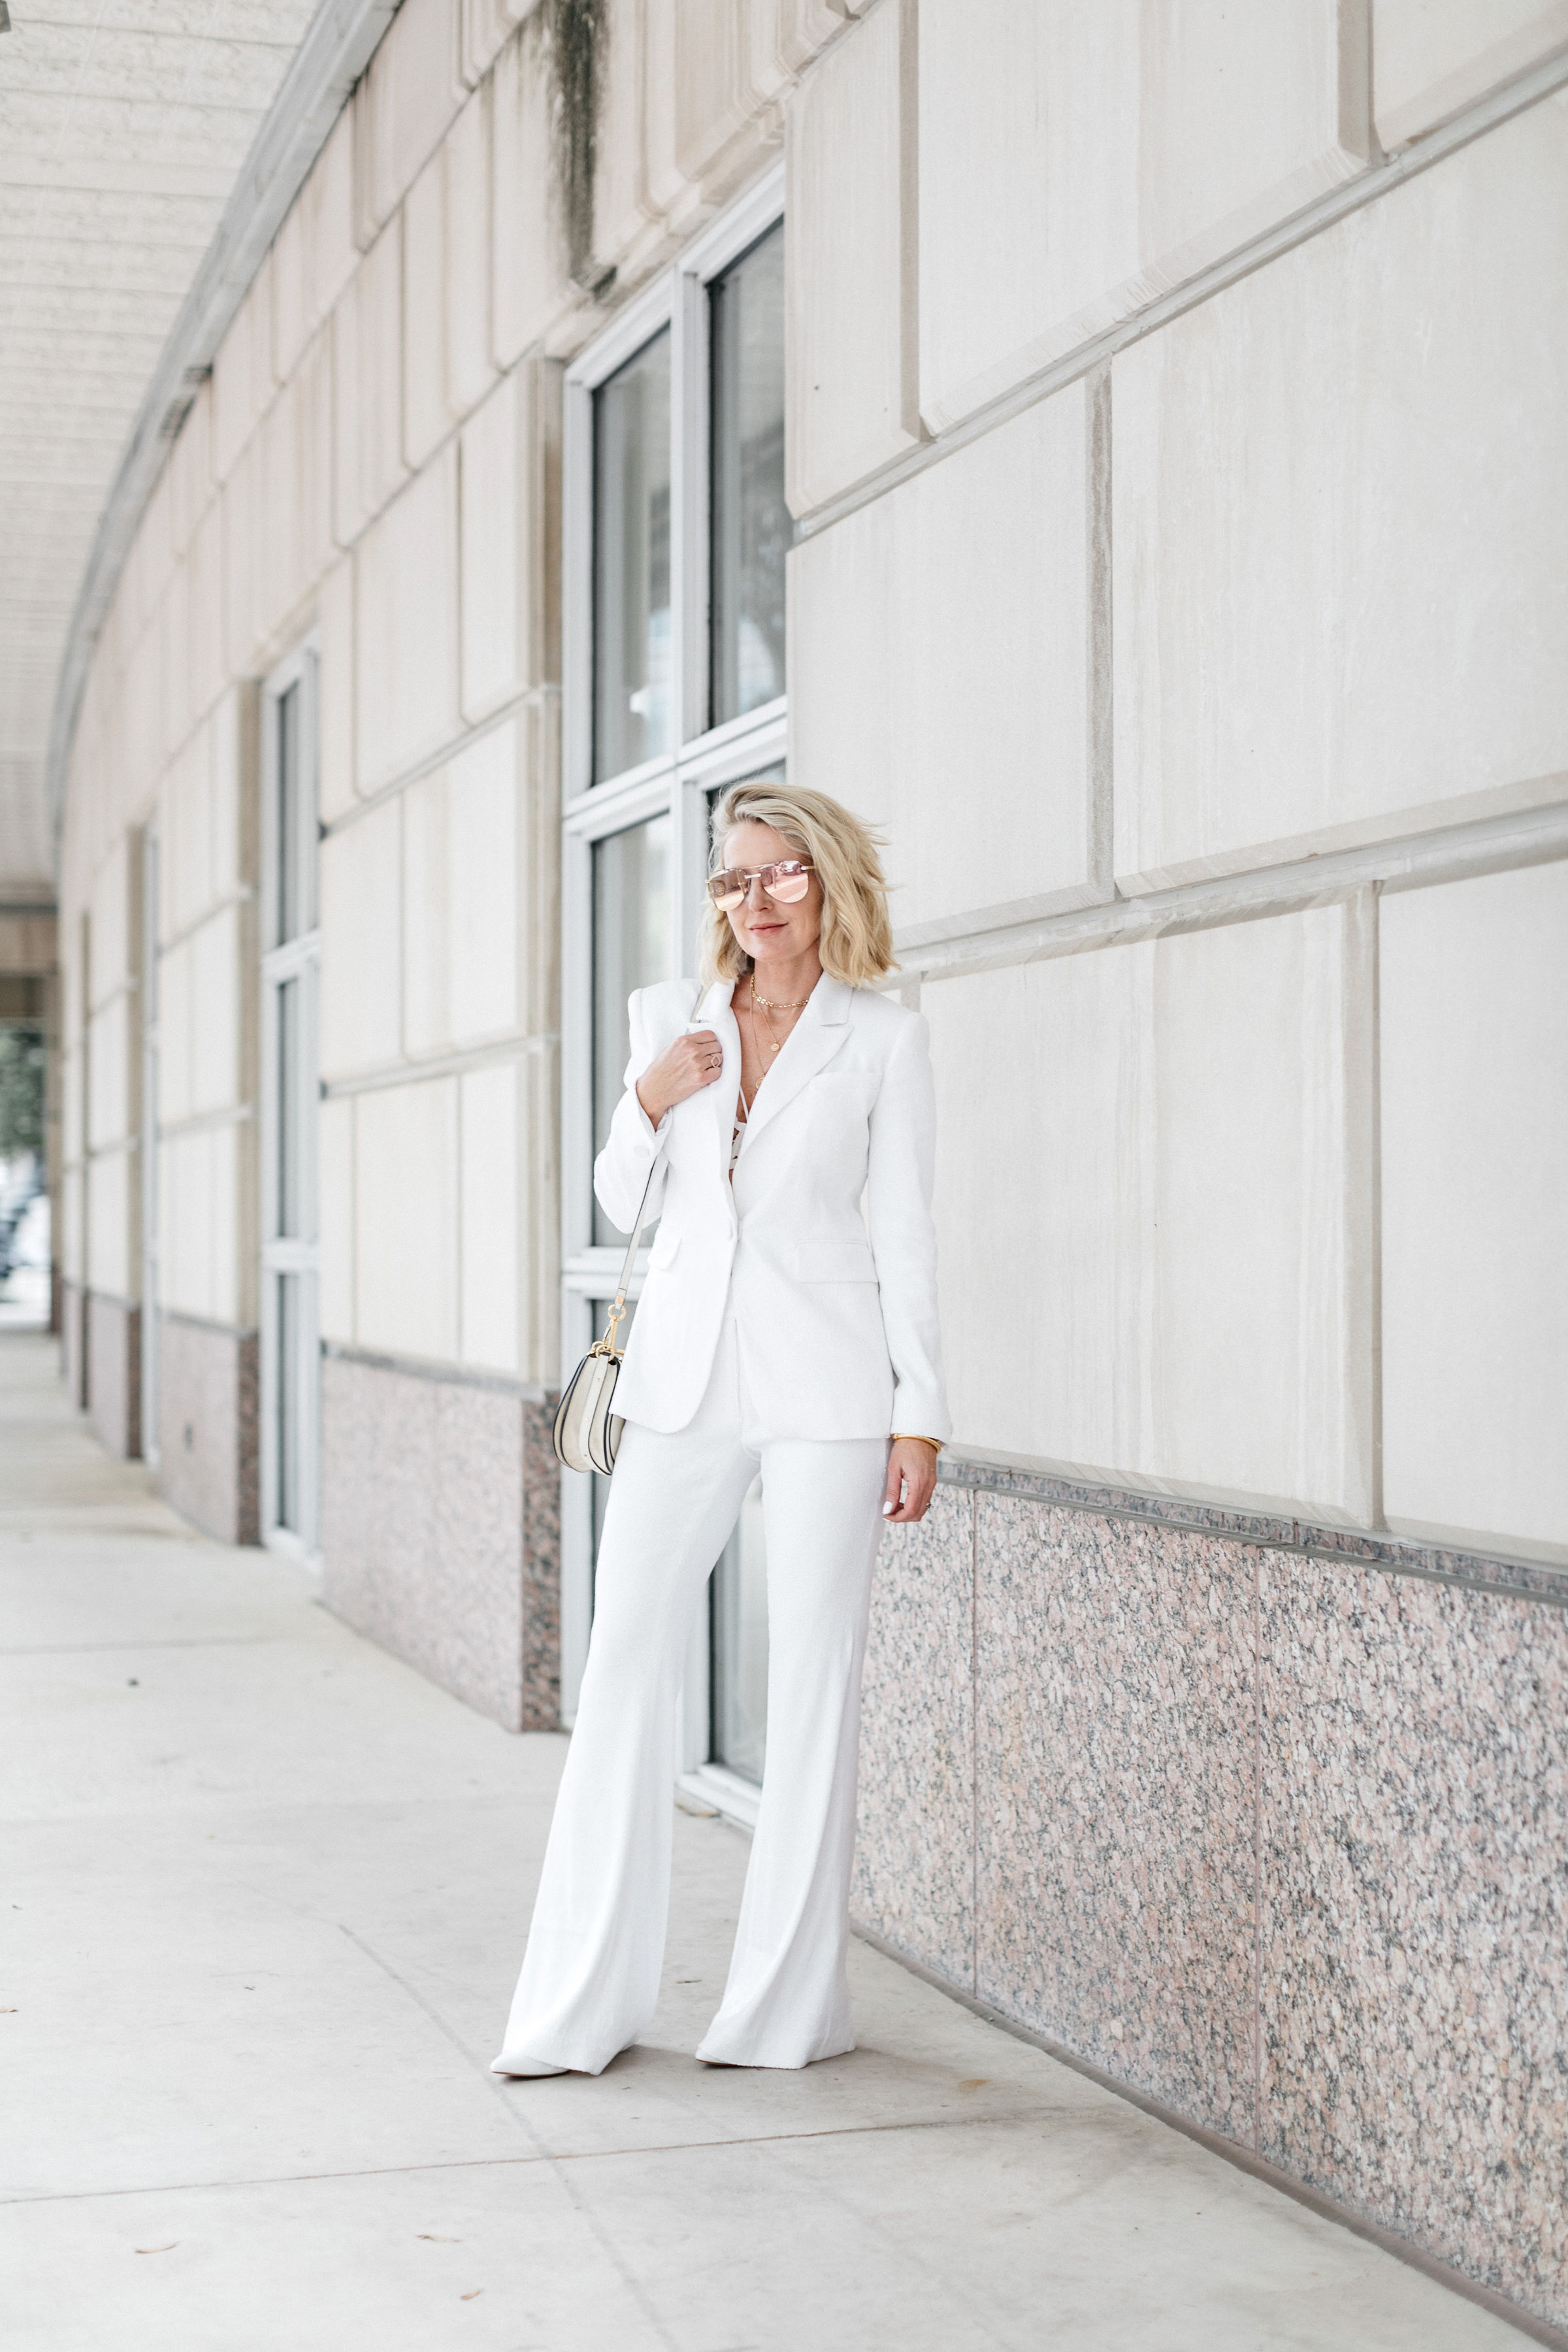 Perfect White Suit, Fashion blogger Erin Busbee of BusbeeStyle.com wearing a matching white sequin blazer and wide leg pants by Rachel Zoe, white pointed toe pumps, and a white chloe nile bag in Dallas, Texas, sequin tops for new year's eve, how to wear a sequin top, sequin top outfit ideas